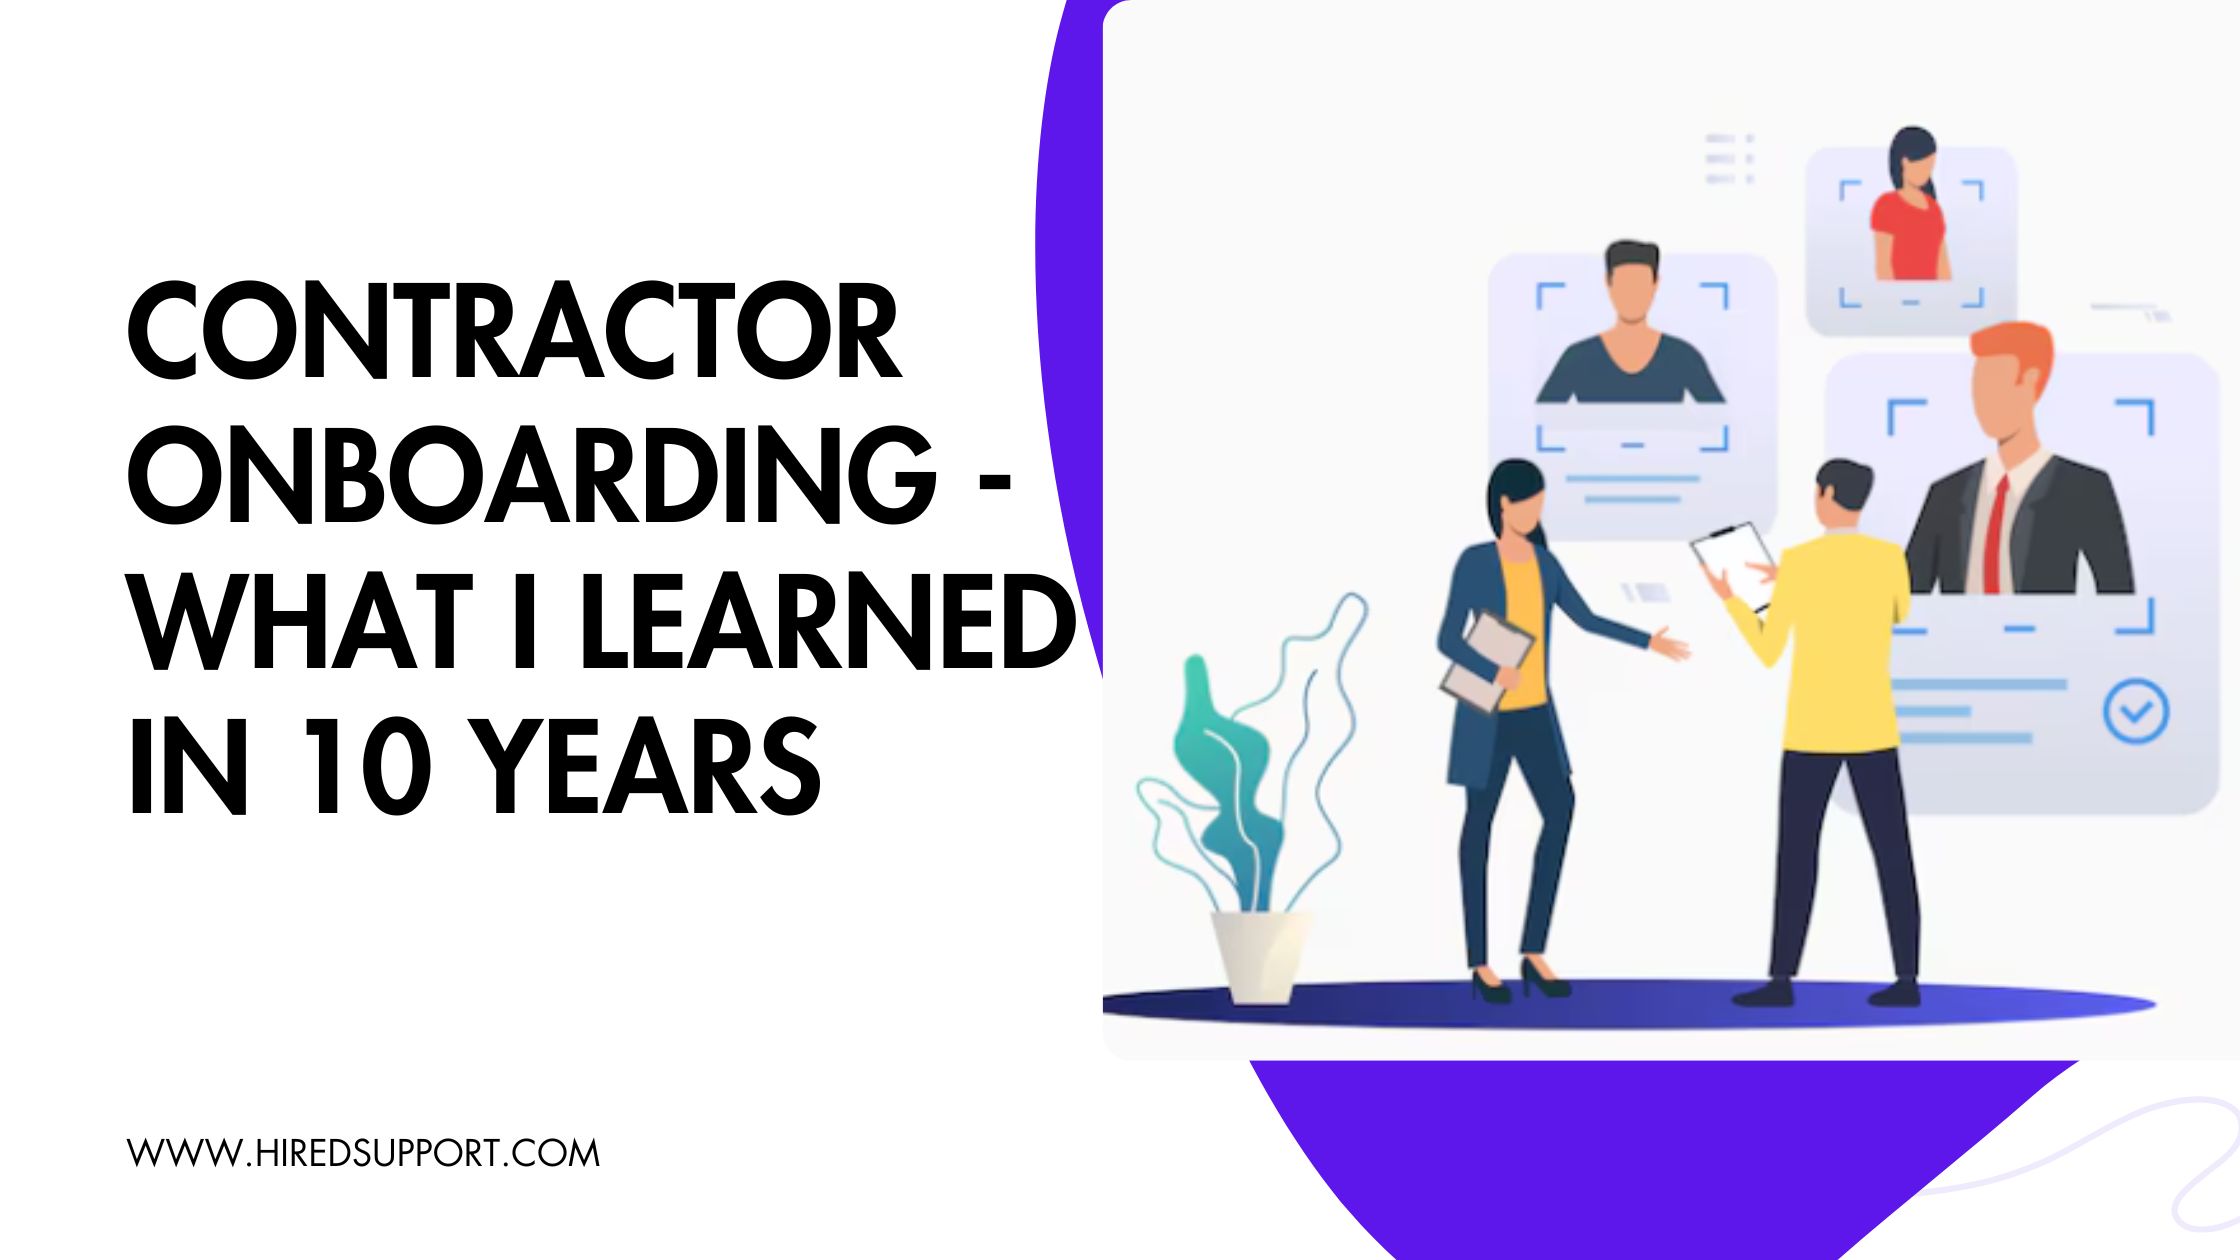 Contractor Onboarding - What I Learned in 10 Years